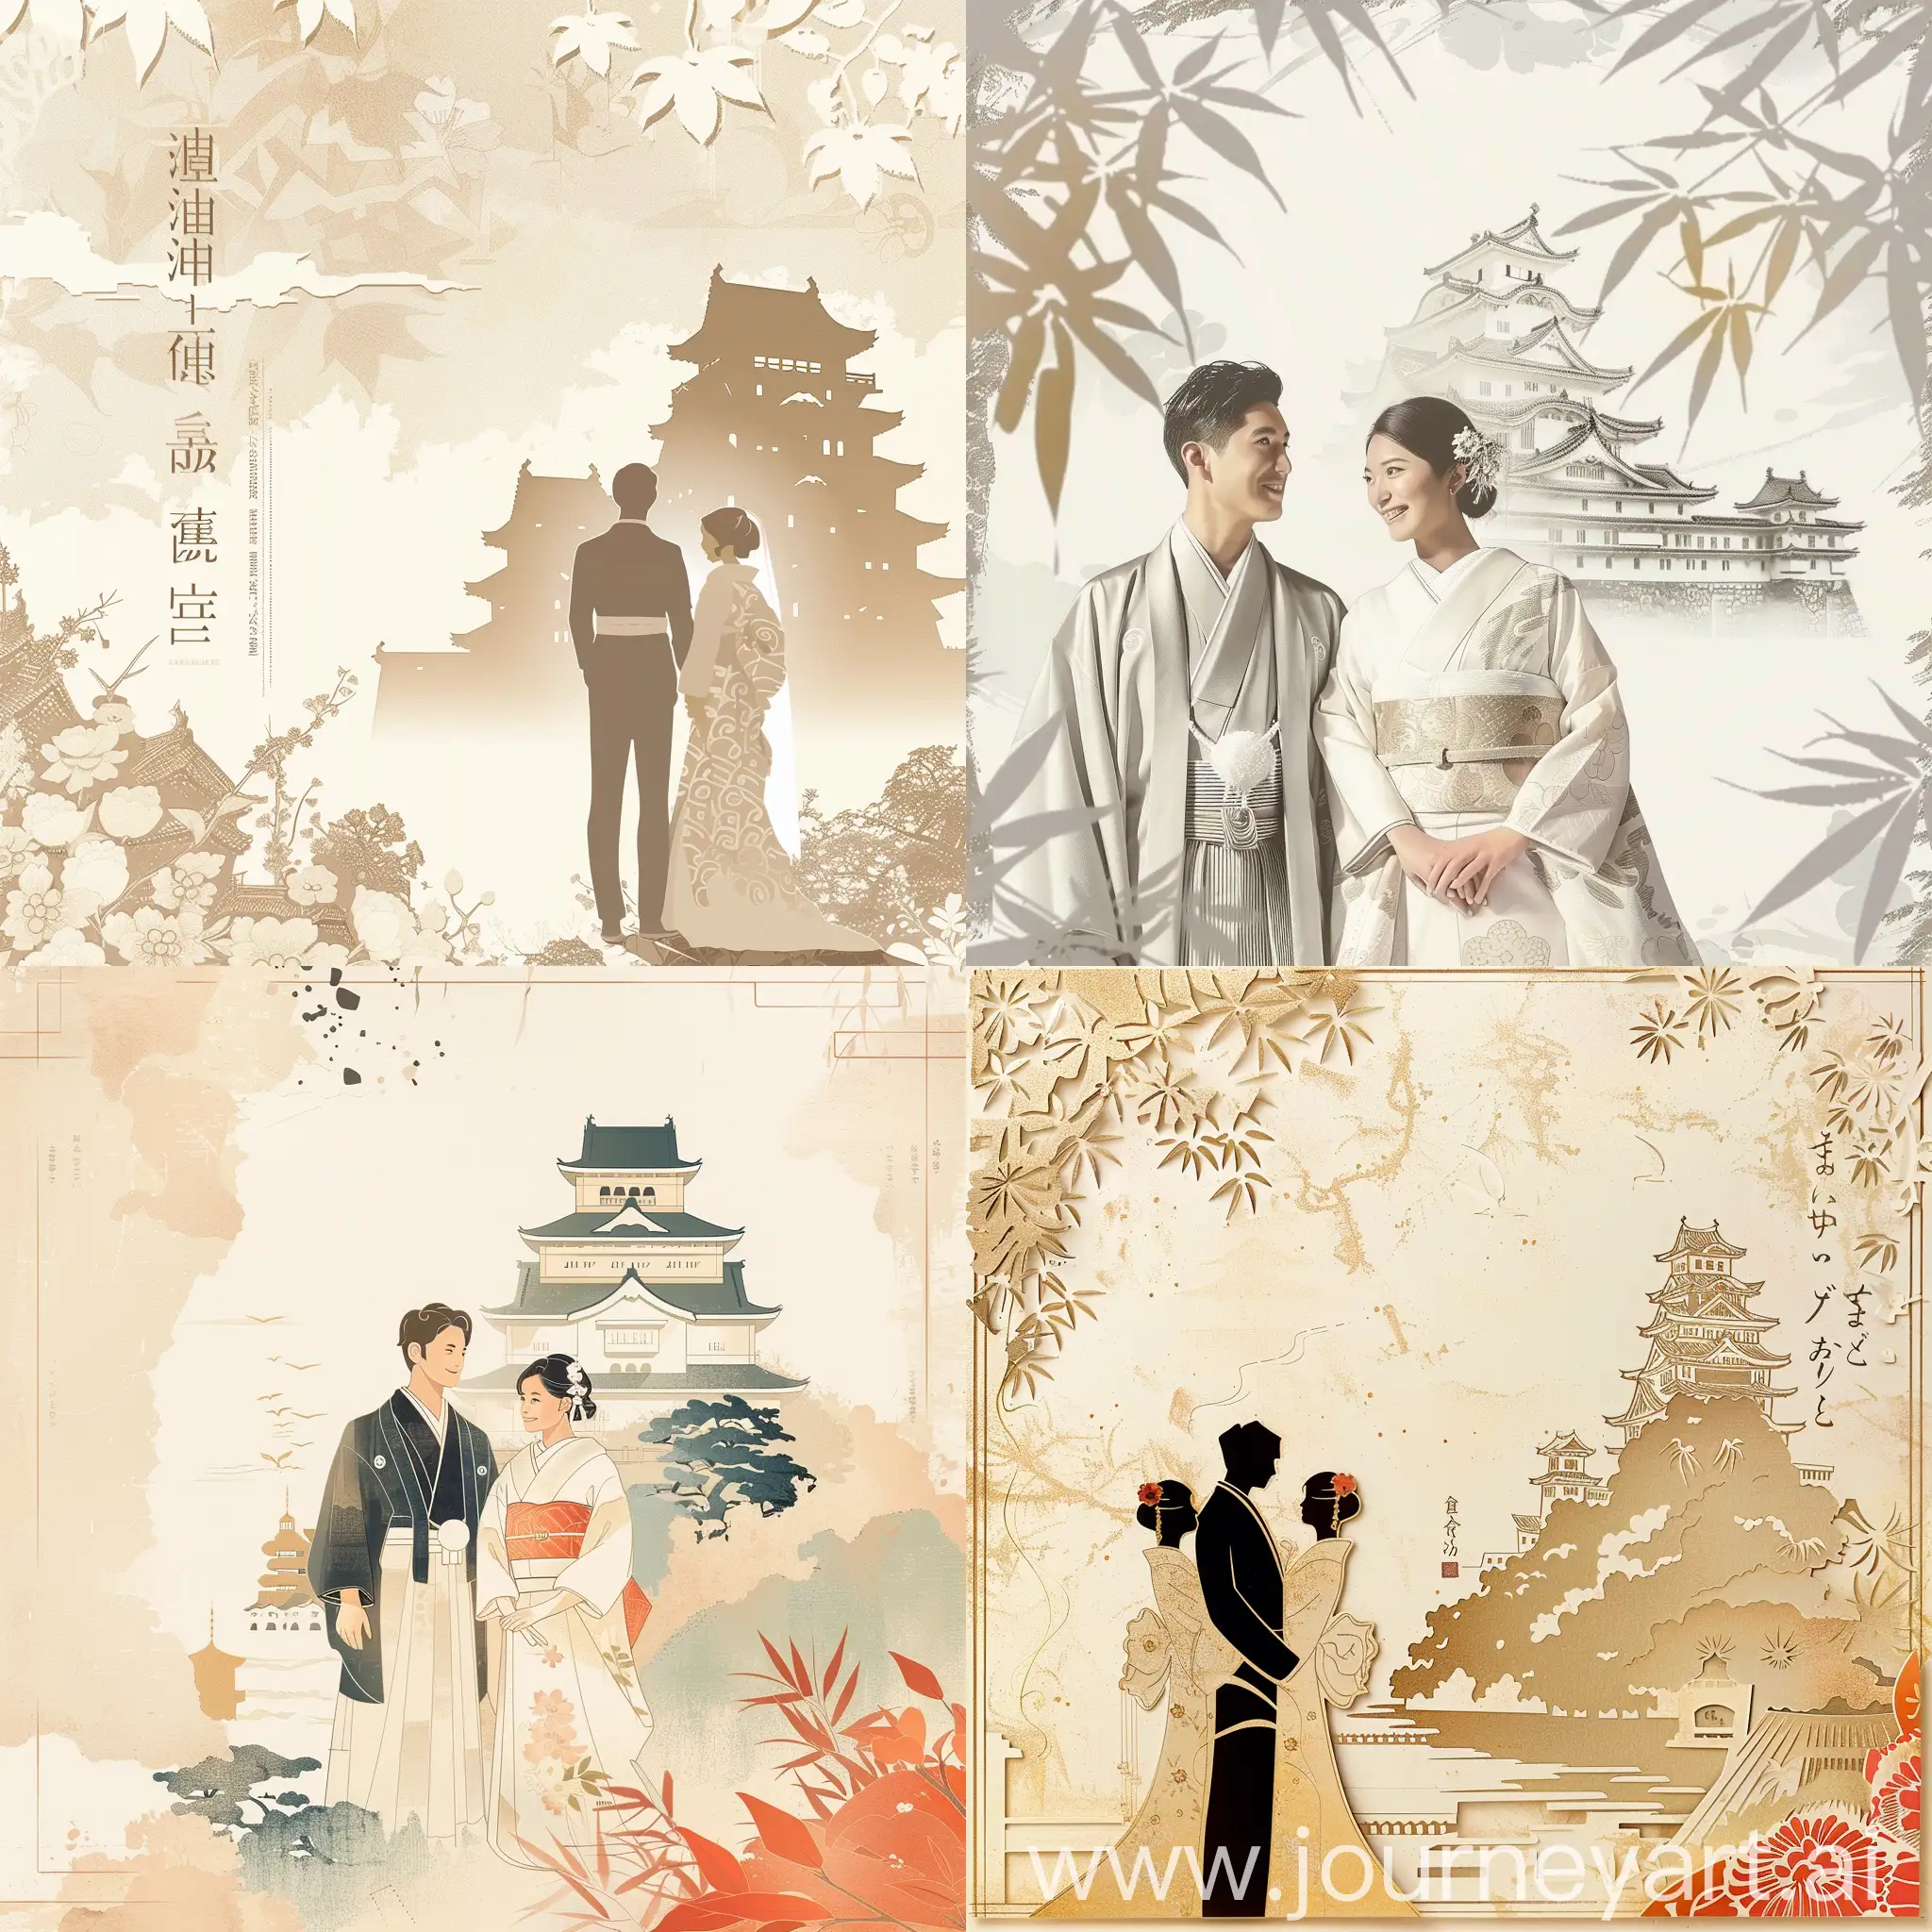 Japanese-Traditional-Wedding-Invitation-with-Bride-and-Groom-Standing-Affectionately-in-Front-of-White-Castle